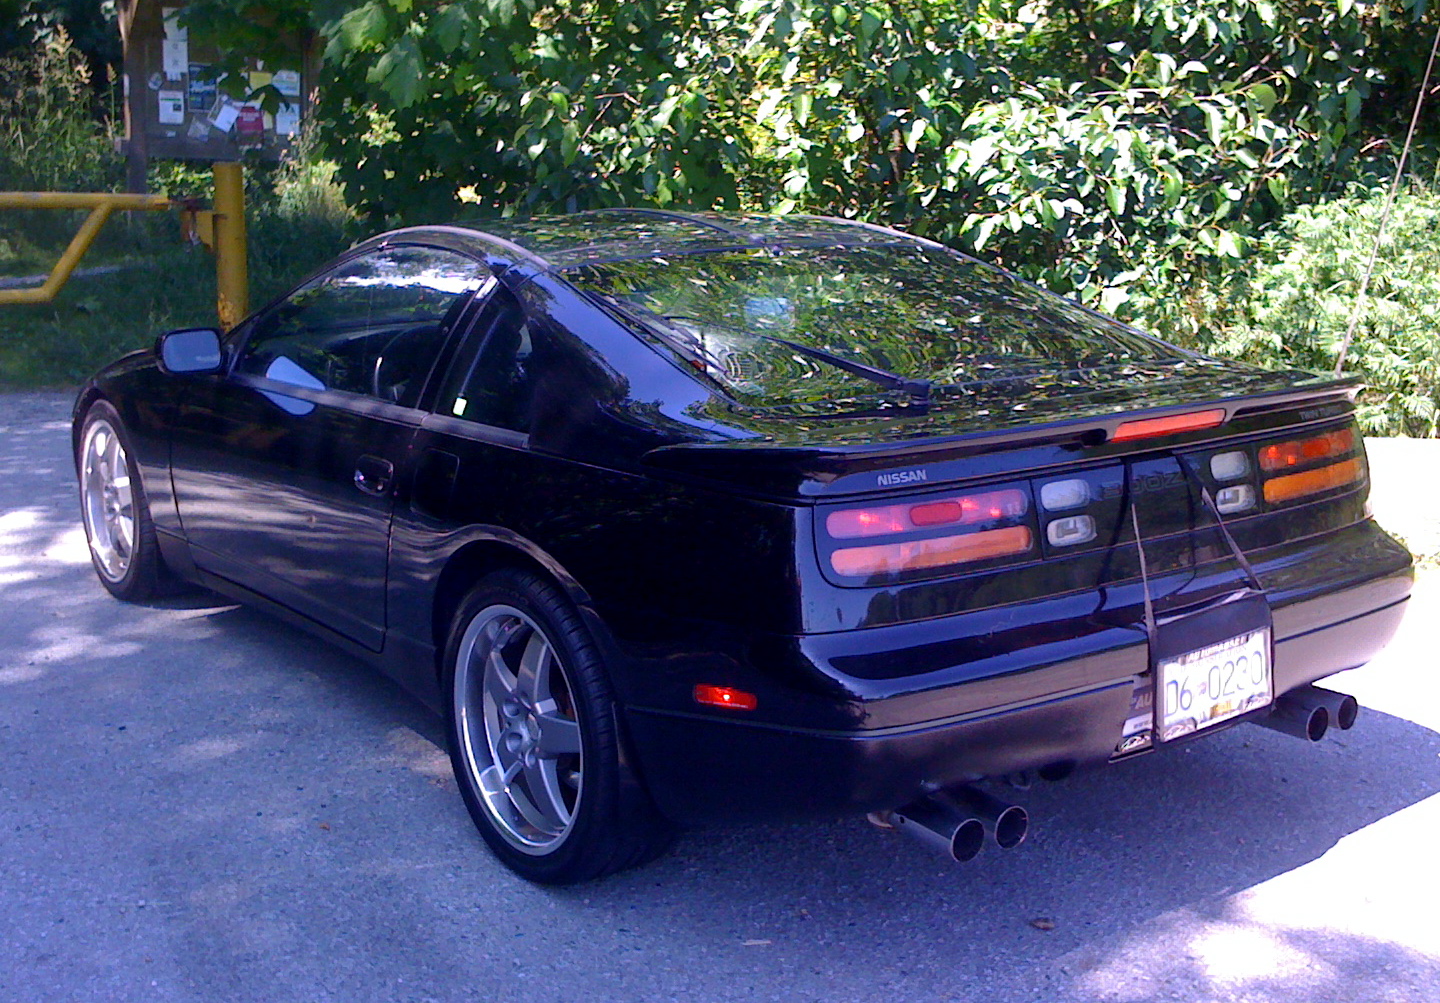 Nissan 300zx turbo review #7